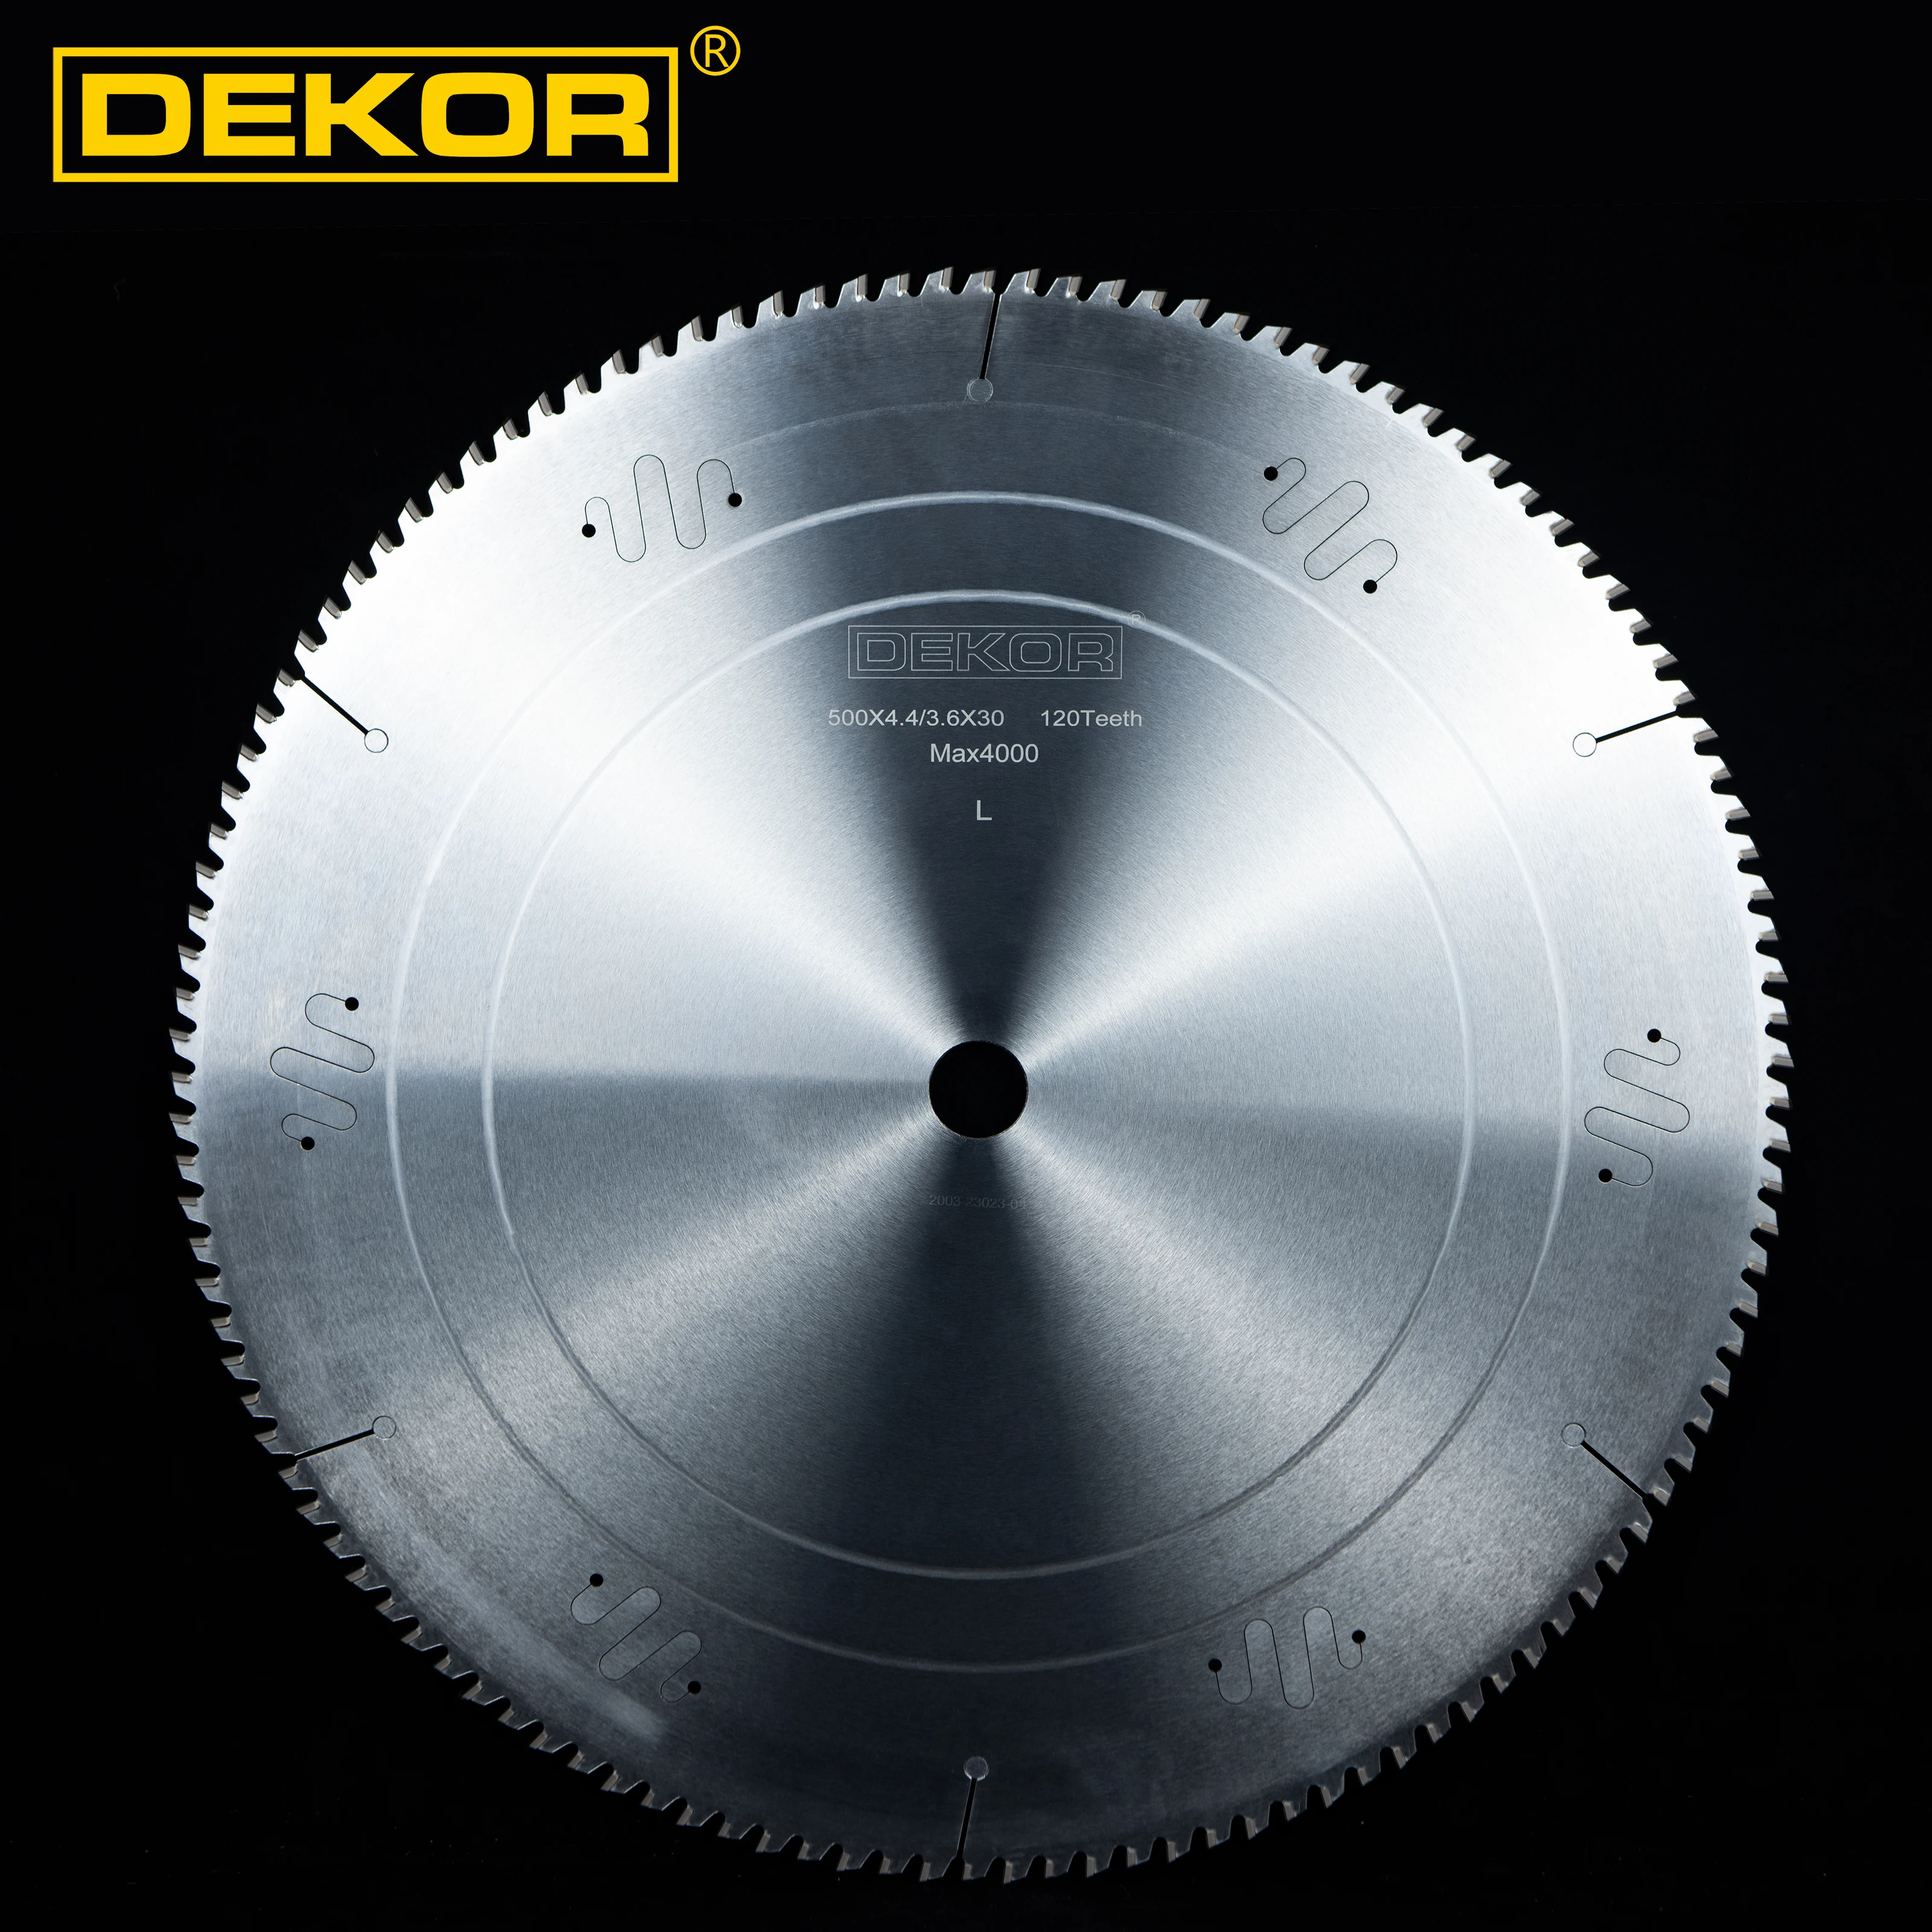 Dekor 600mm PCD Circular Saw Blade 144T(Triple chip tooth) for cutting Aluminum machines